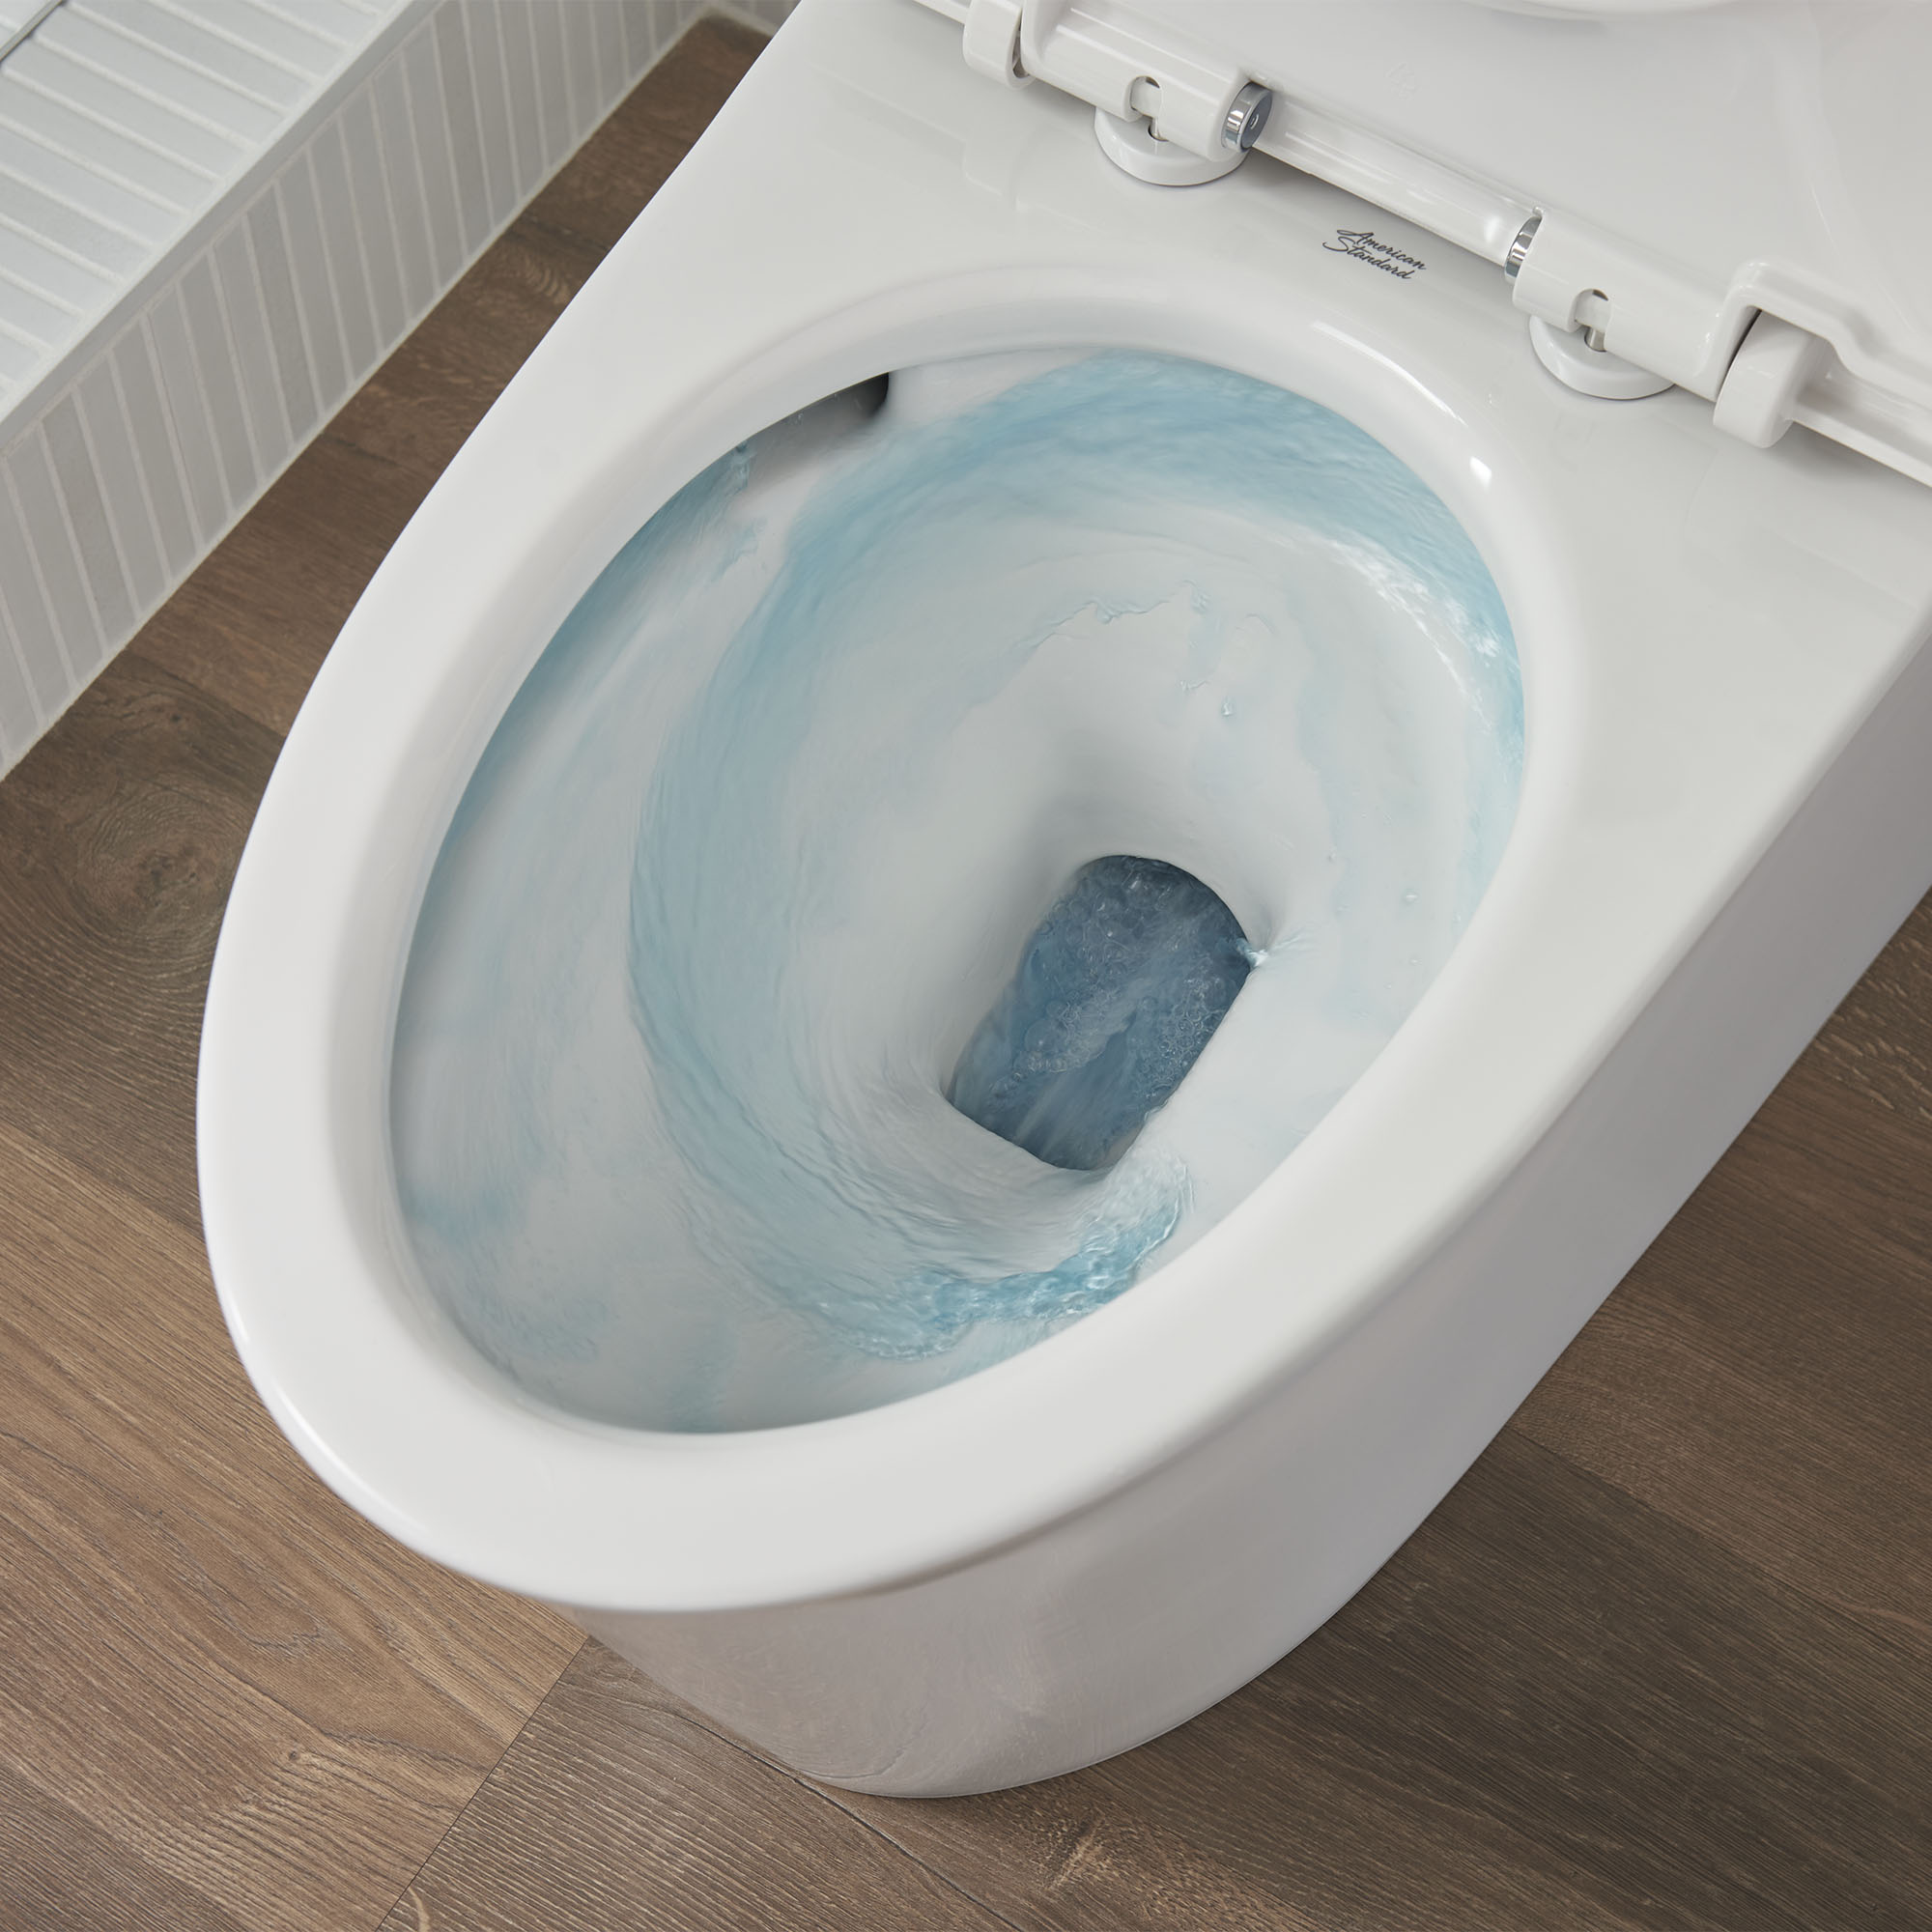 American Standard Studio S 1-piece 1.0 GPF White Elongated Low-Profile Toilet, Seat Included - image 8 of 14